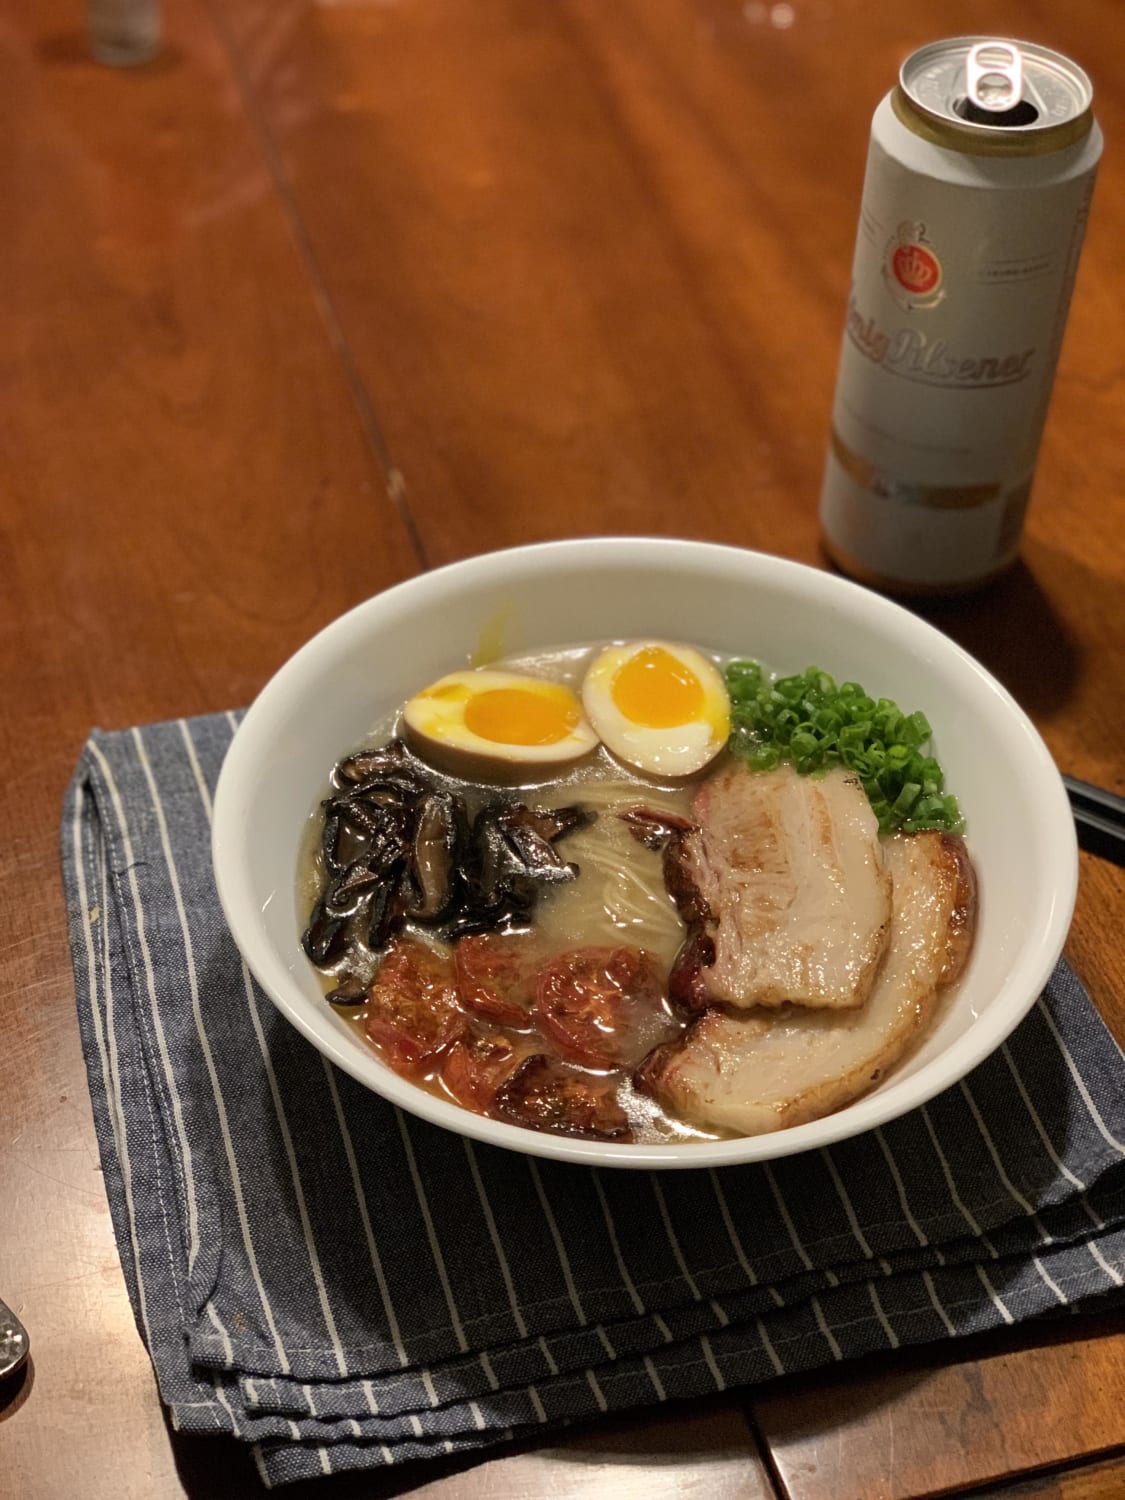 Best bowl i've made so far. tonkotsu with smoked then braised chashu pork belly, confit tomatoes, sautéed shiitake mushrooms, my wife's awesome ajitama, and green onions.